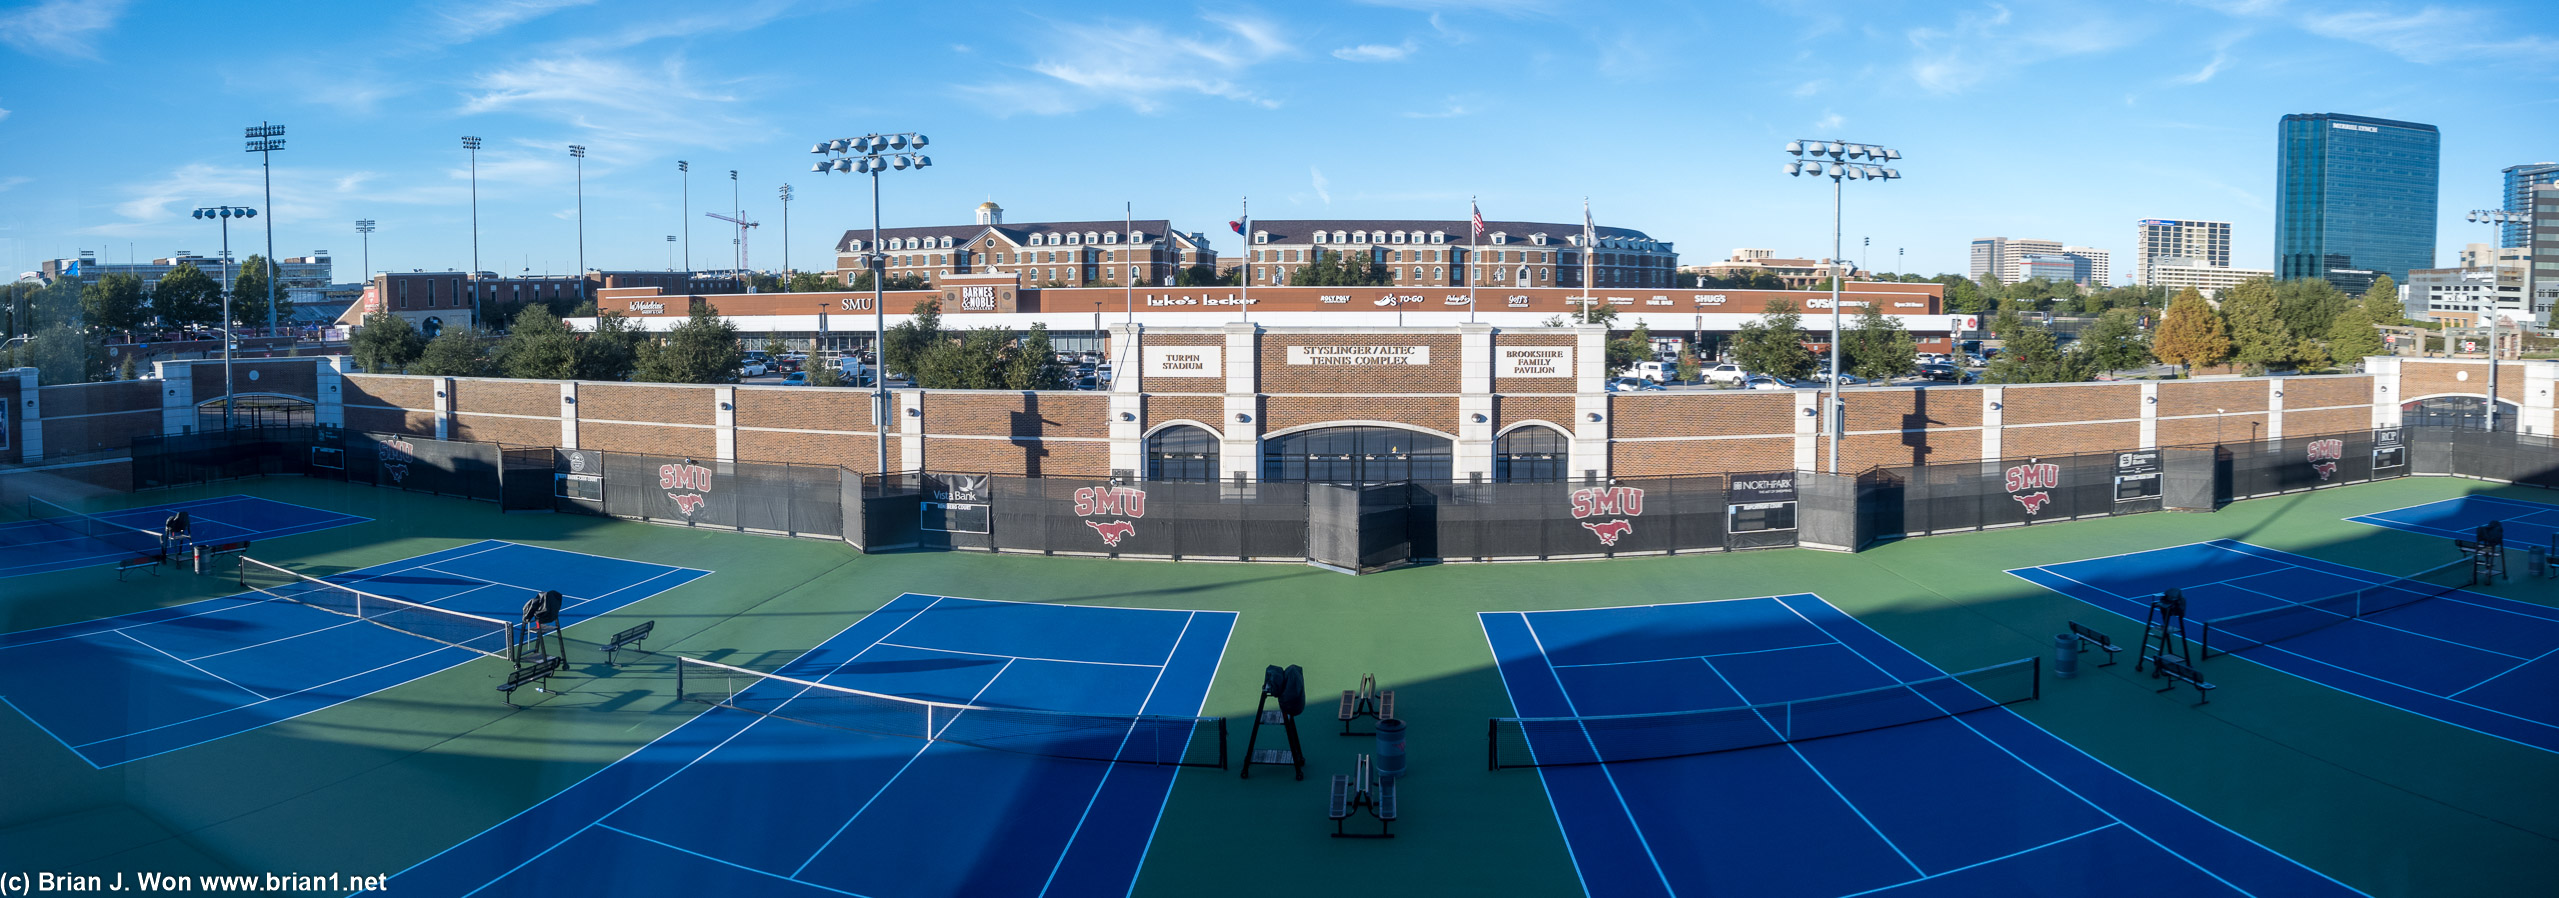 SMU's outdoor tennis courts.